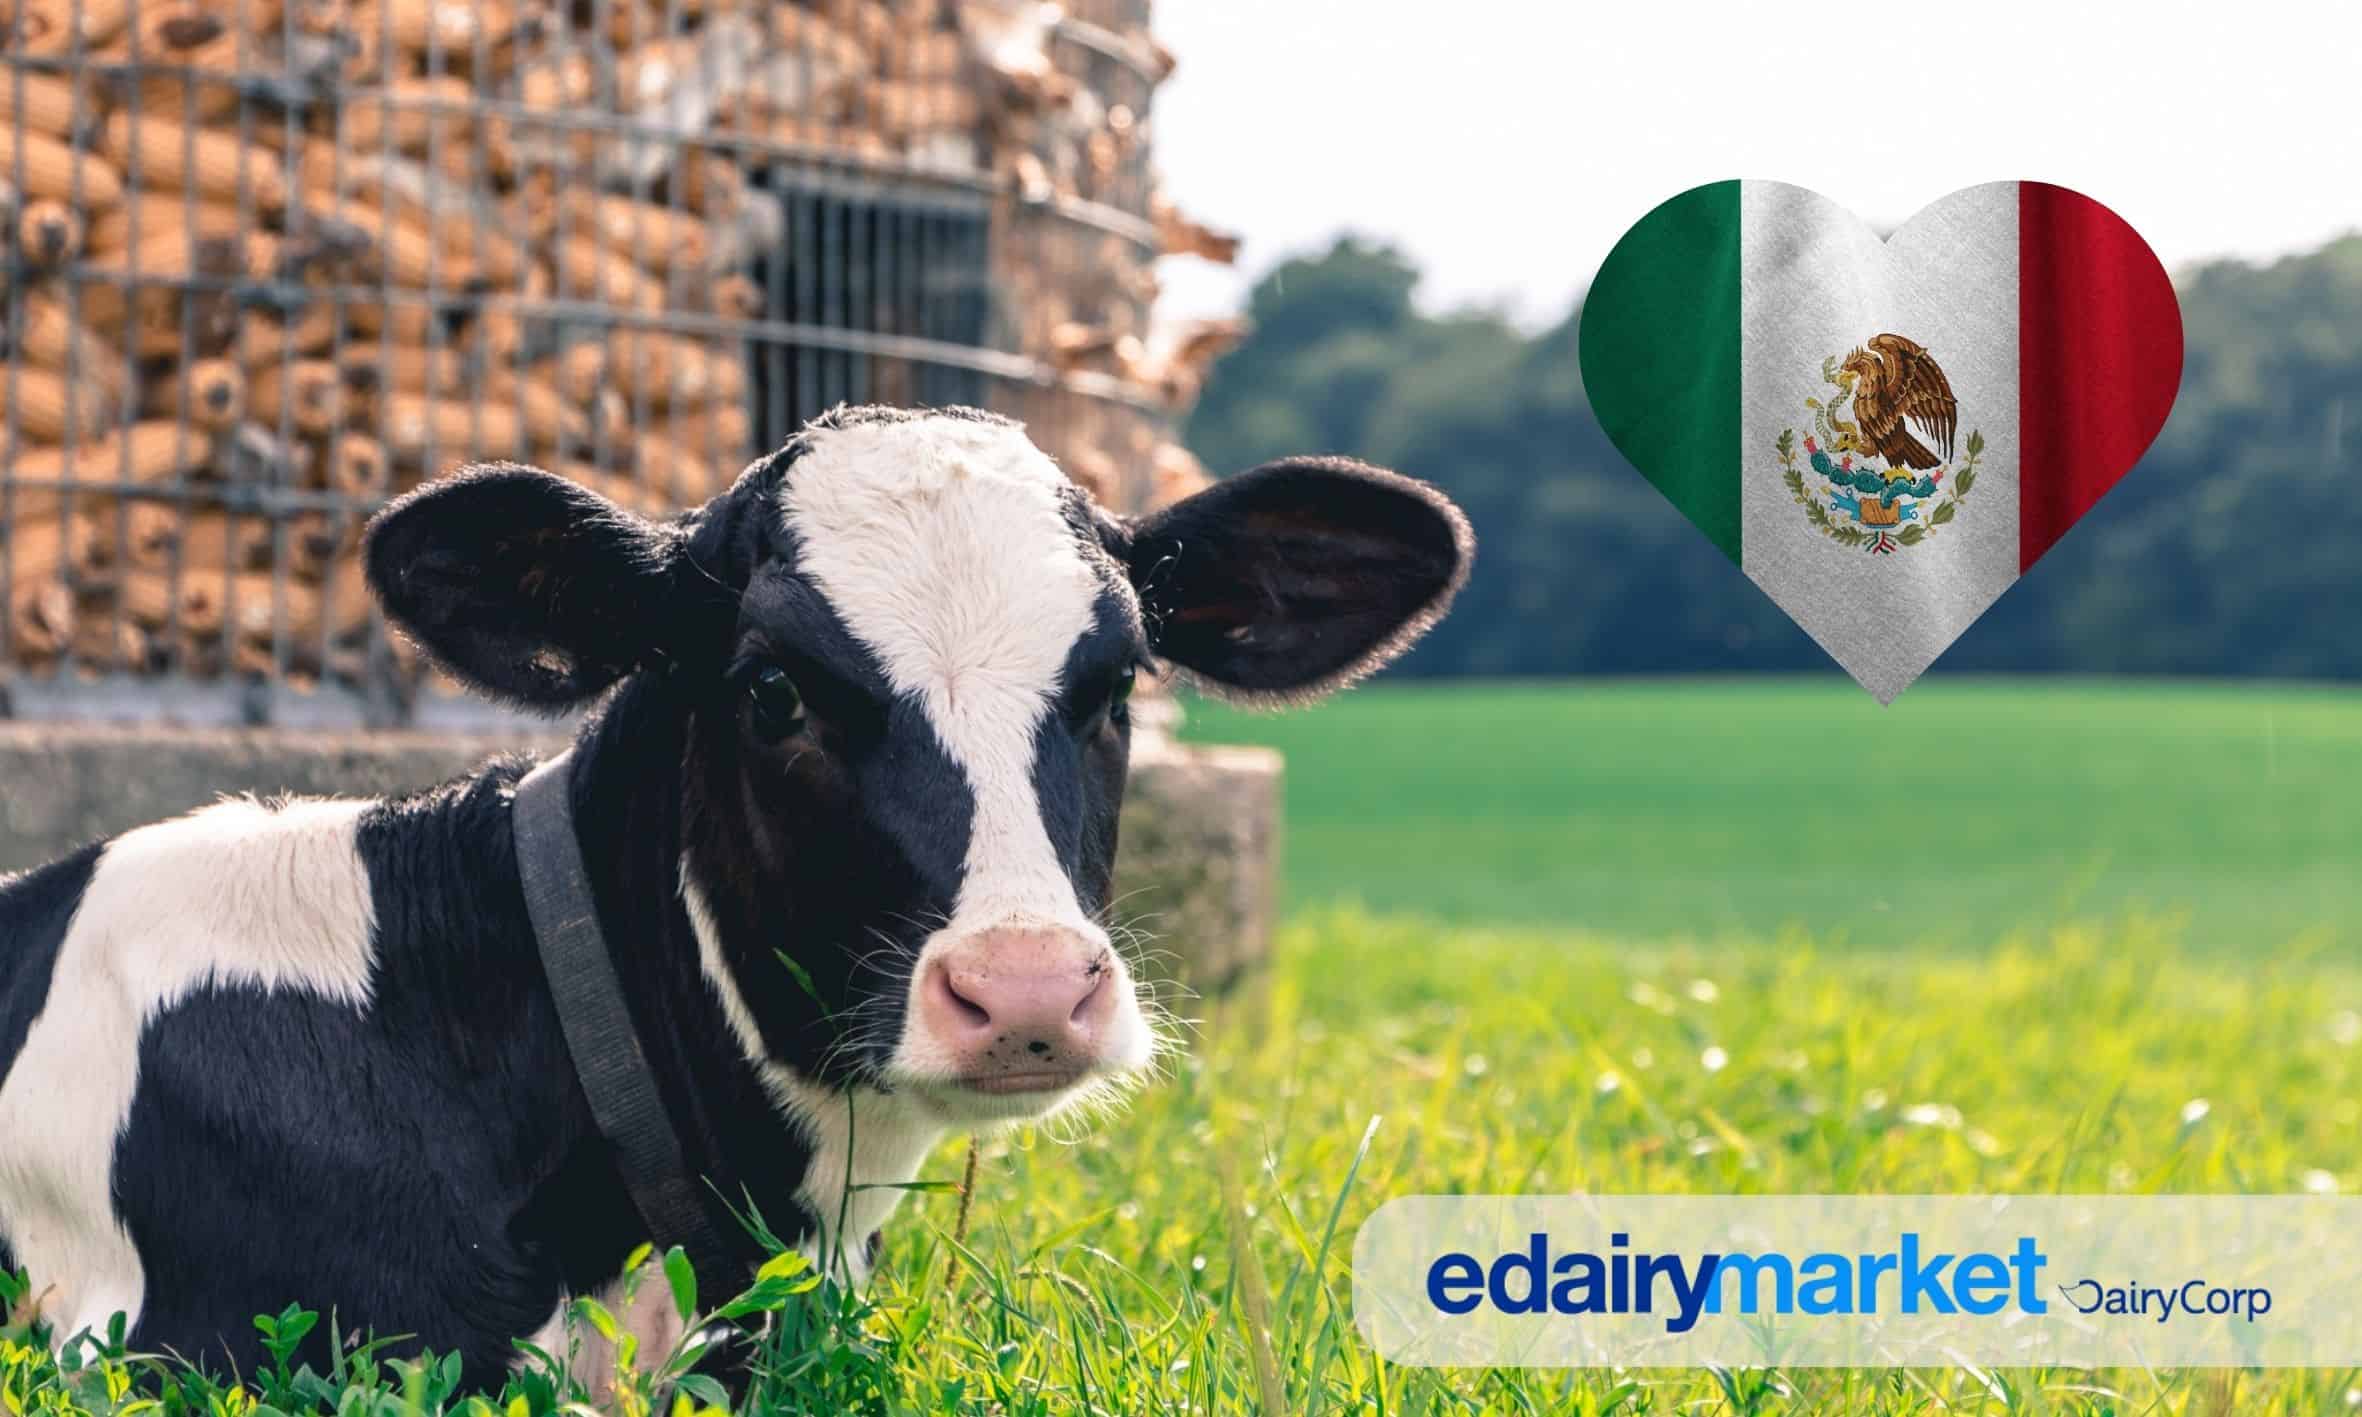 ¡The Liquid Gold of Mexico! Get to Know the Cattle Breeds That Are Transforming the Dairy Industry